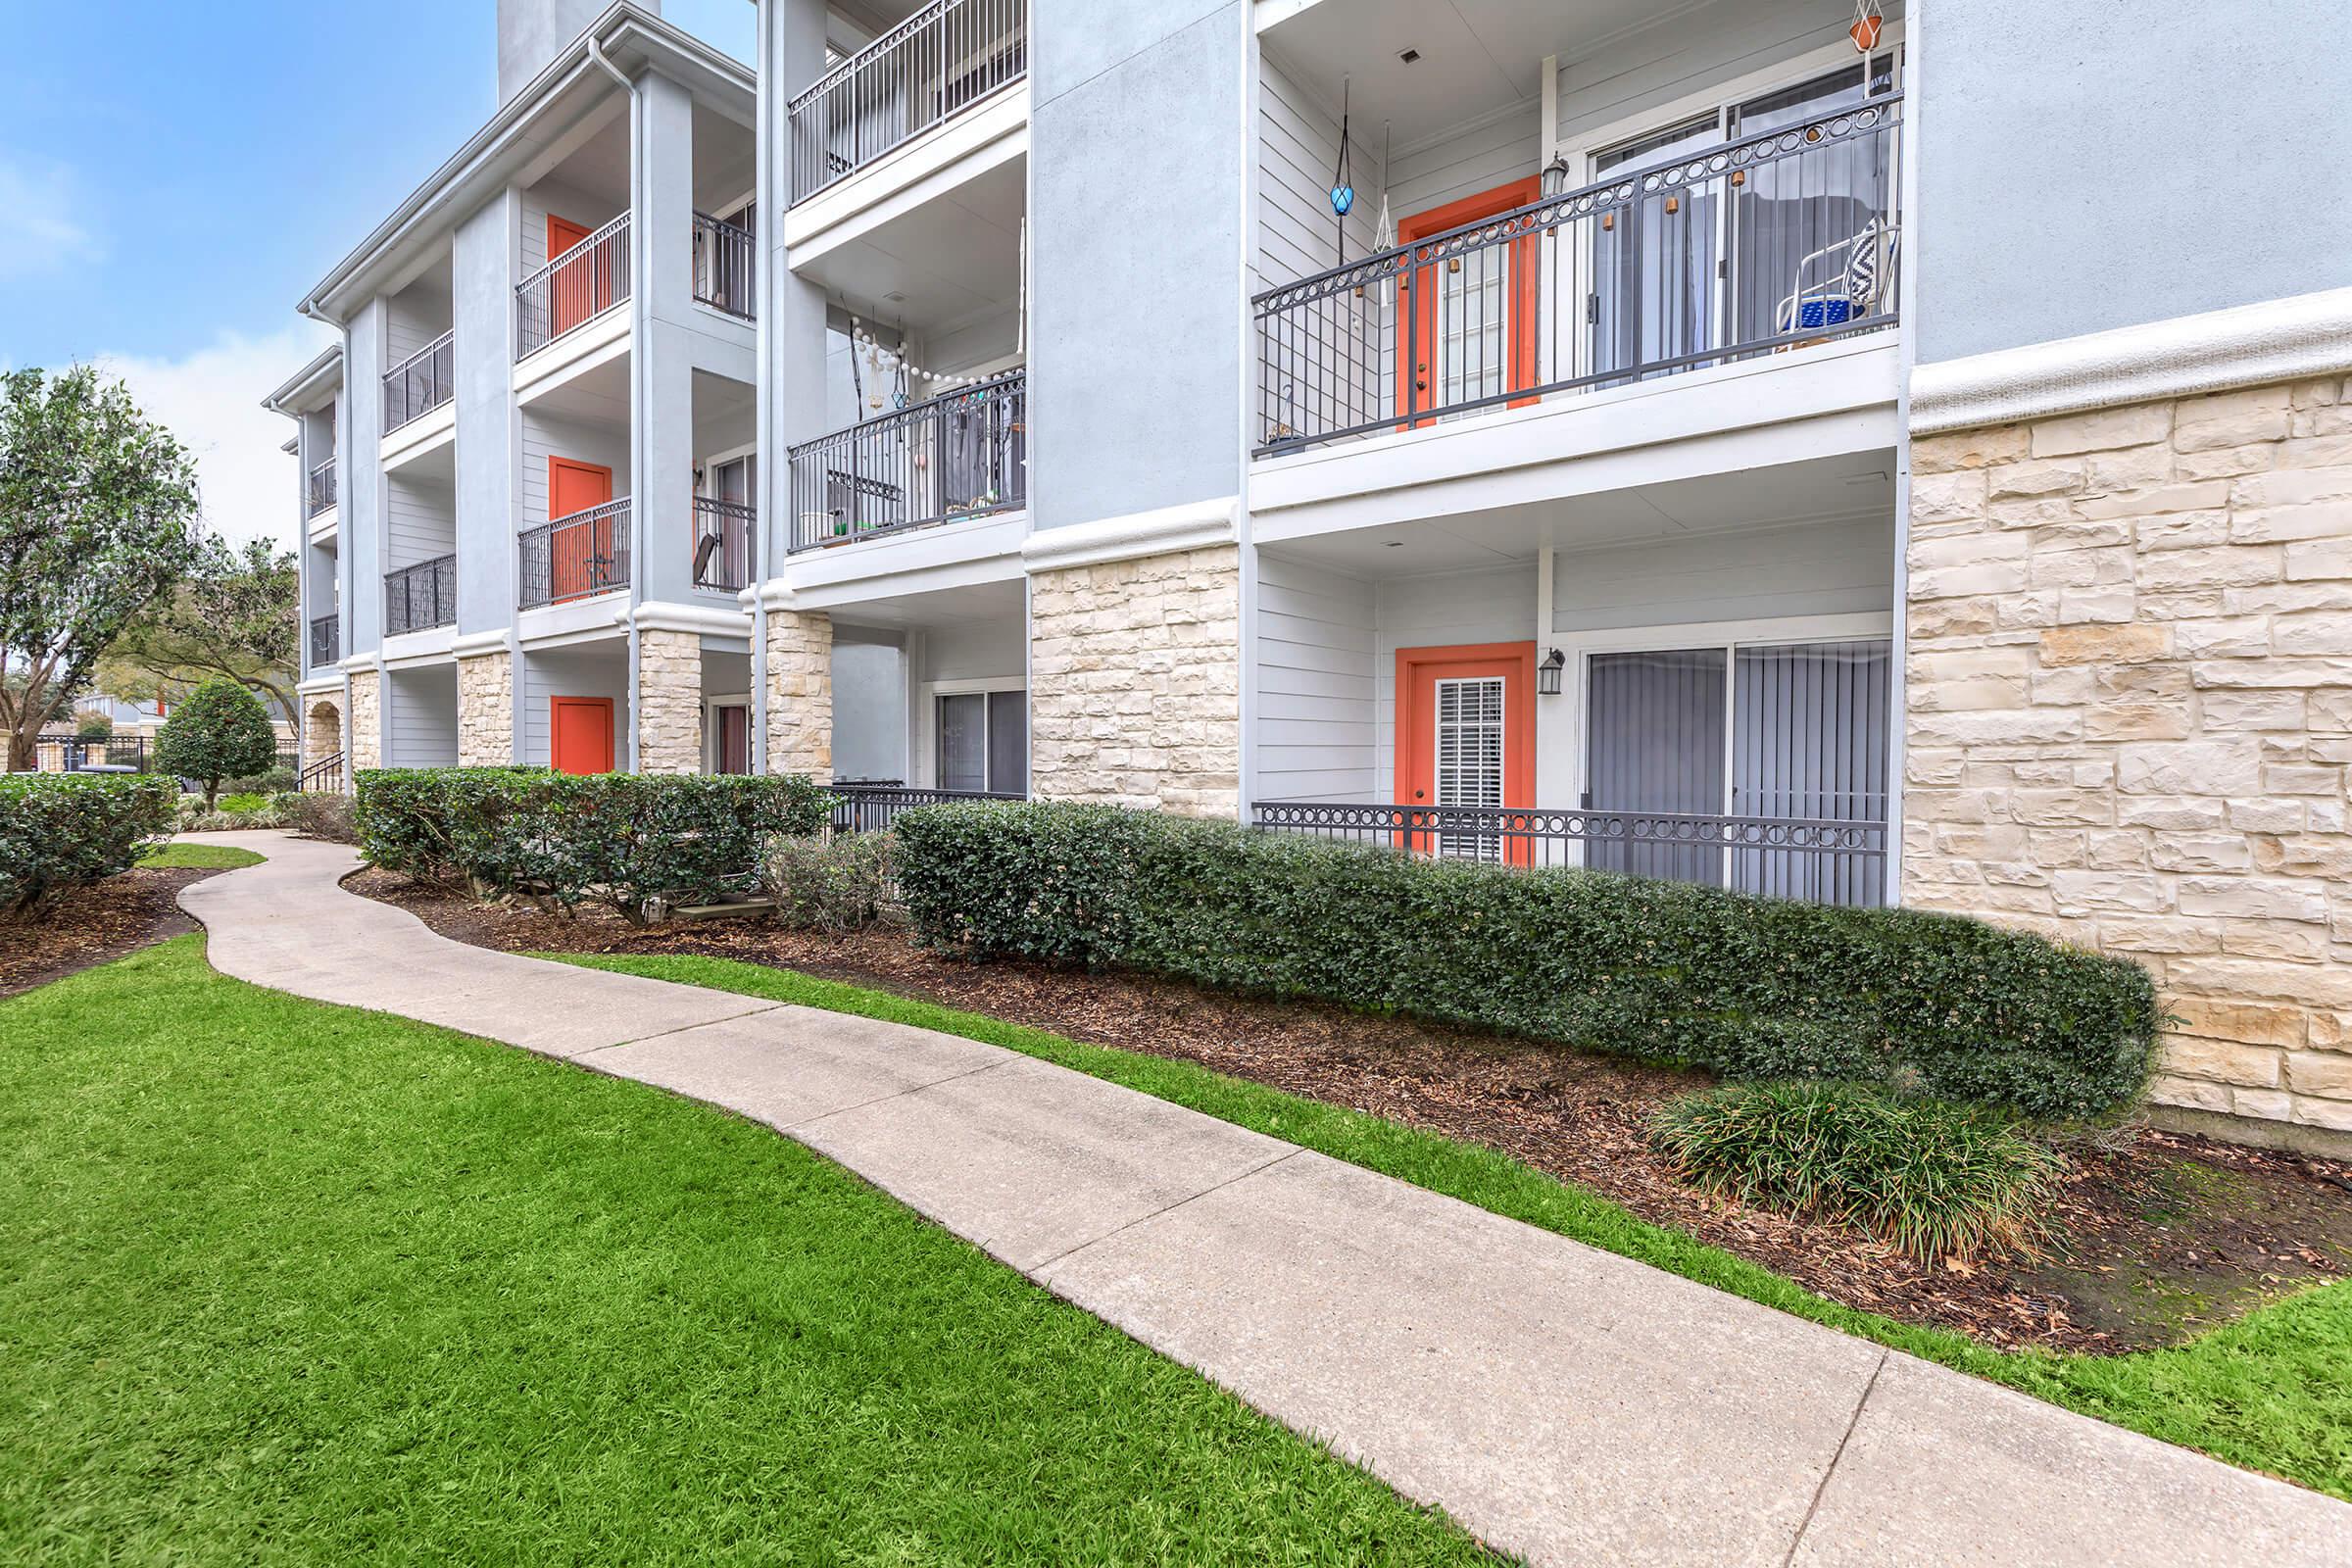 1, 2, AND 3 BEDROOM APARTMENTS FOR RENT IN HOUSTON, TX